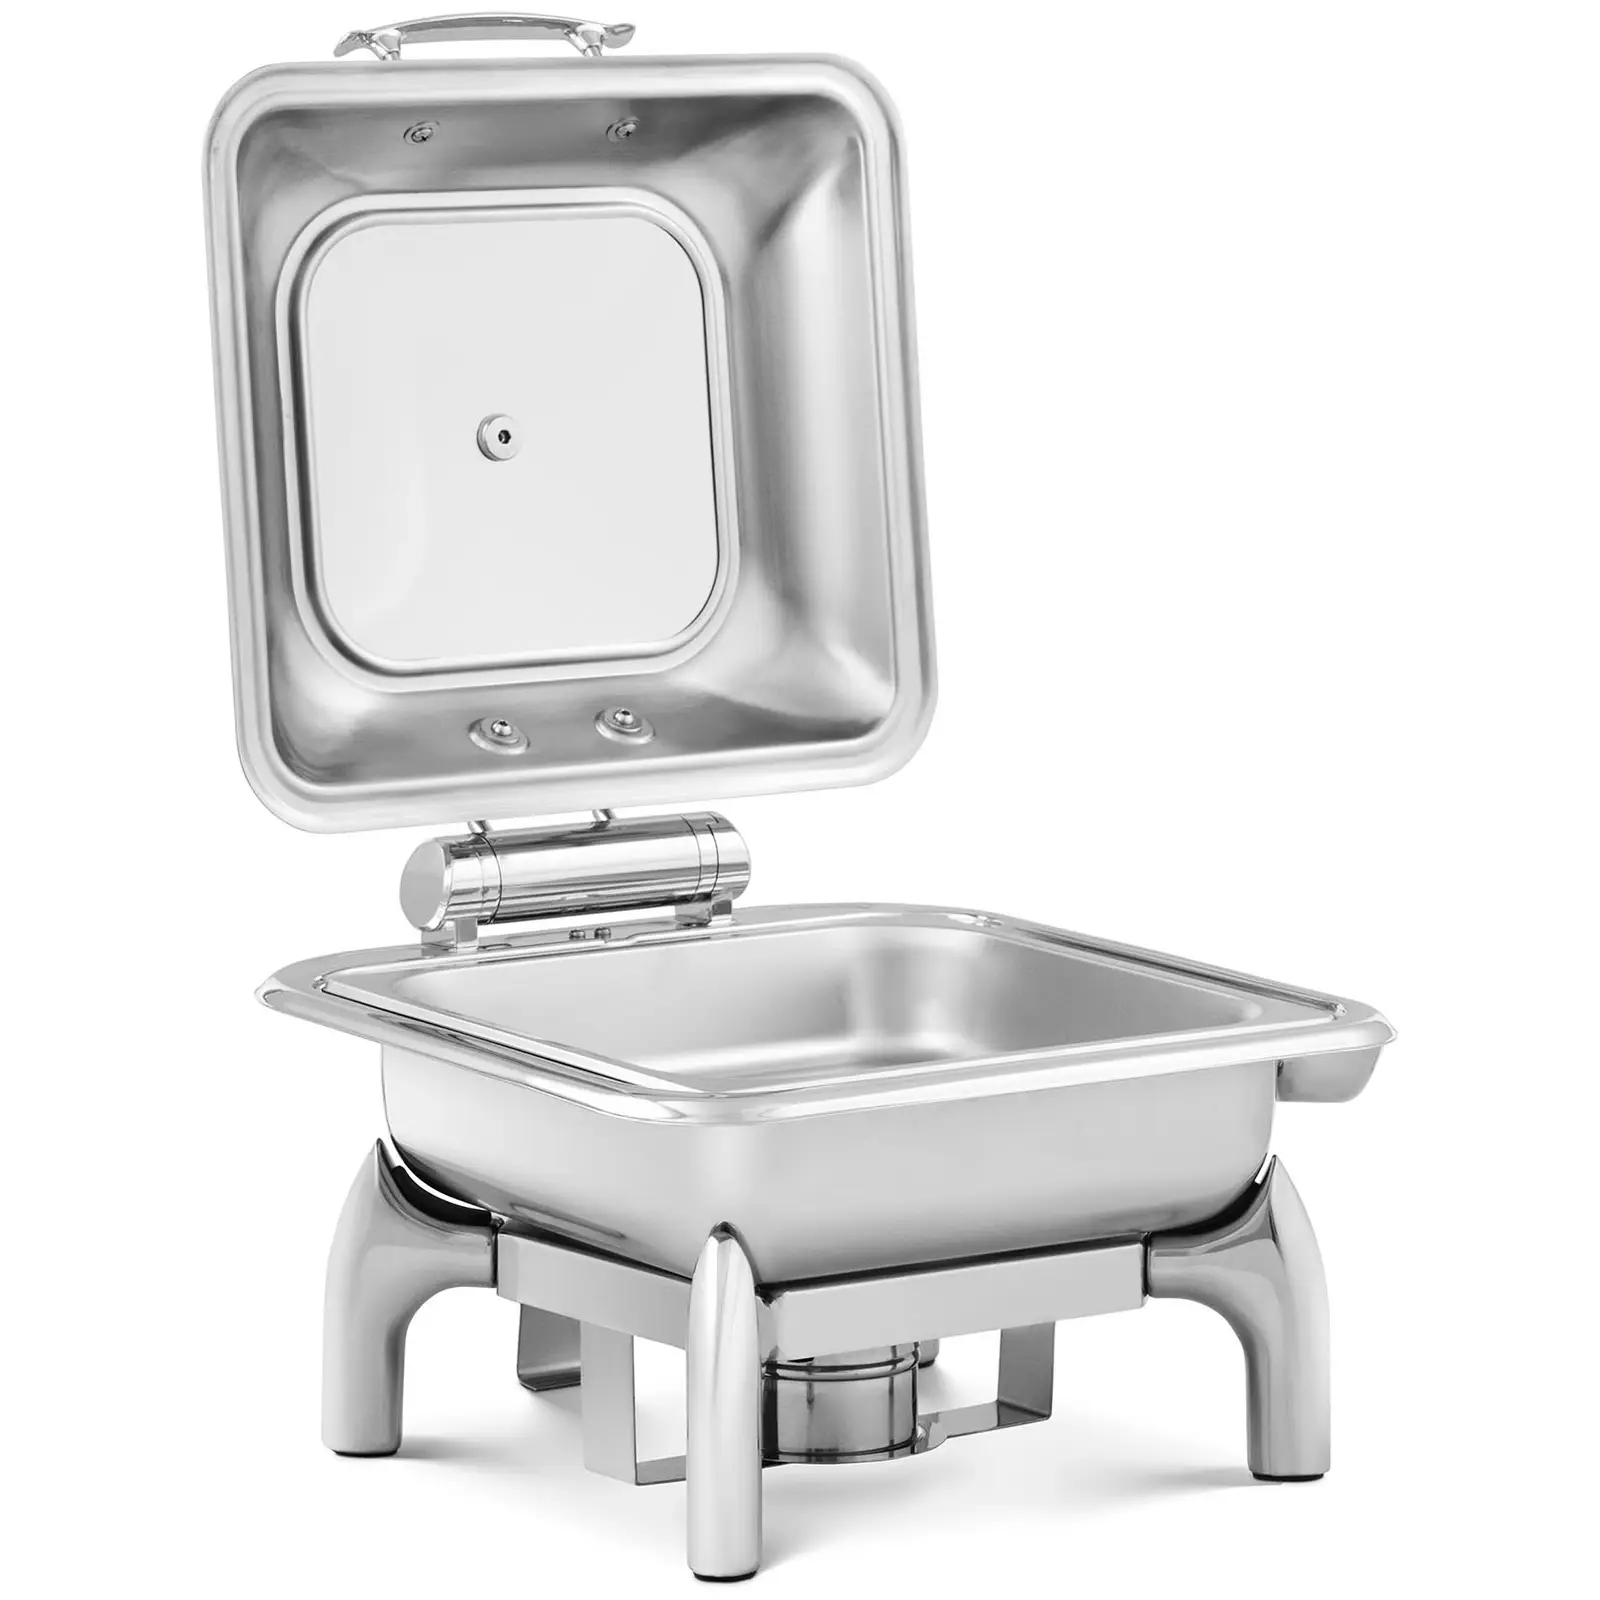 Chafing Dish - GN 2/3 - Royal Catering - 5.3 L - 1 brenncelle